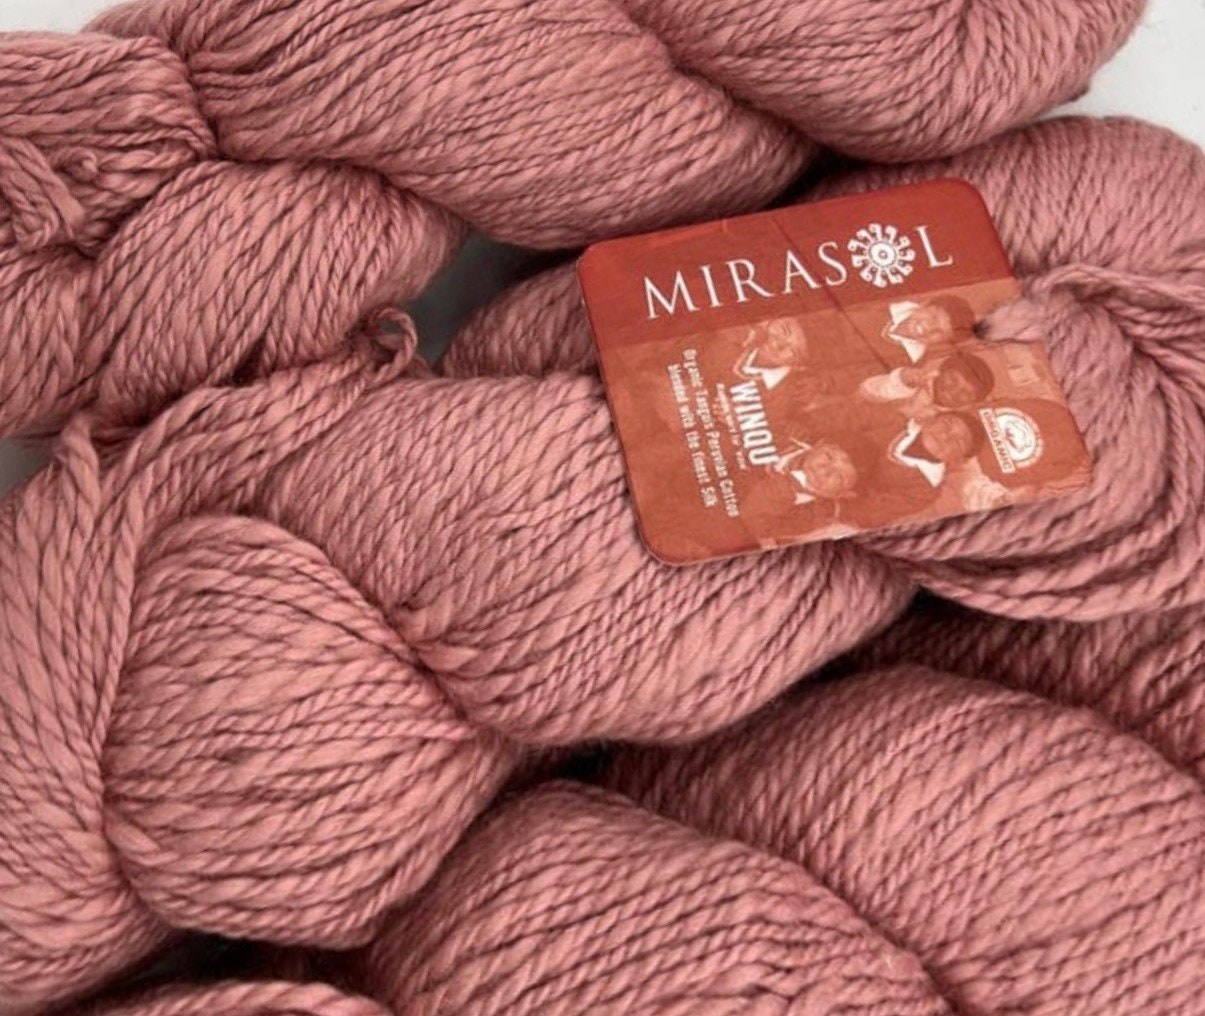 Hand-dyed cotton thick and thin yarn, 525 yard skeins, in shades of red,  pink, beige, and brown